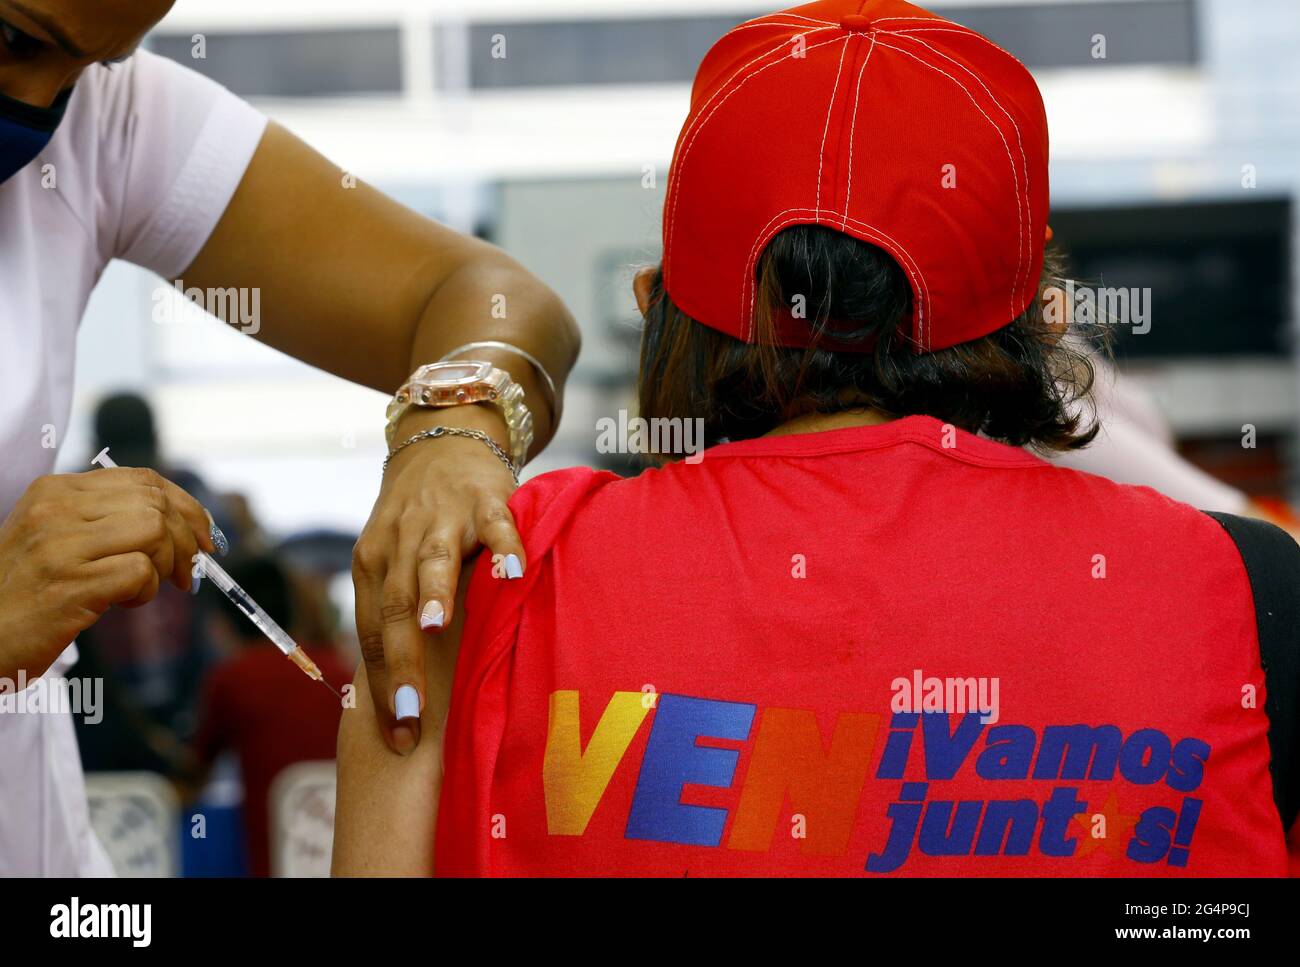 Valencia, Carabobo, Venezuela. 22nd June, 2021. June 22, 2021. Preventive vaccination operation against the COVID-19 pandemic, carried out at the Don Bosco sports center, in Valencia, Carabobo State. Photo: Juan Carlos Hernandez Credit: Juan Carlos Hernandez/ZUMA Wire/Alamy Live News Stock Photo